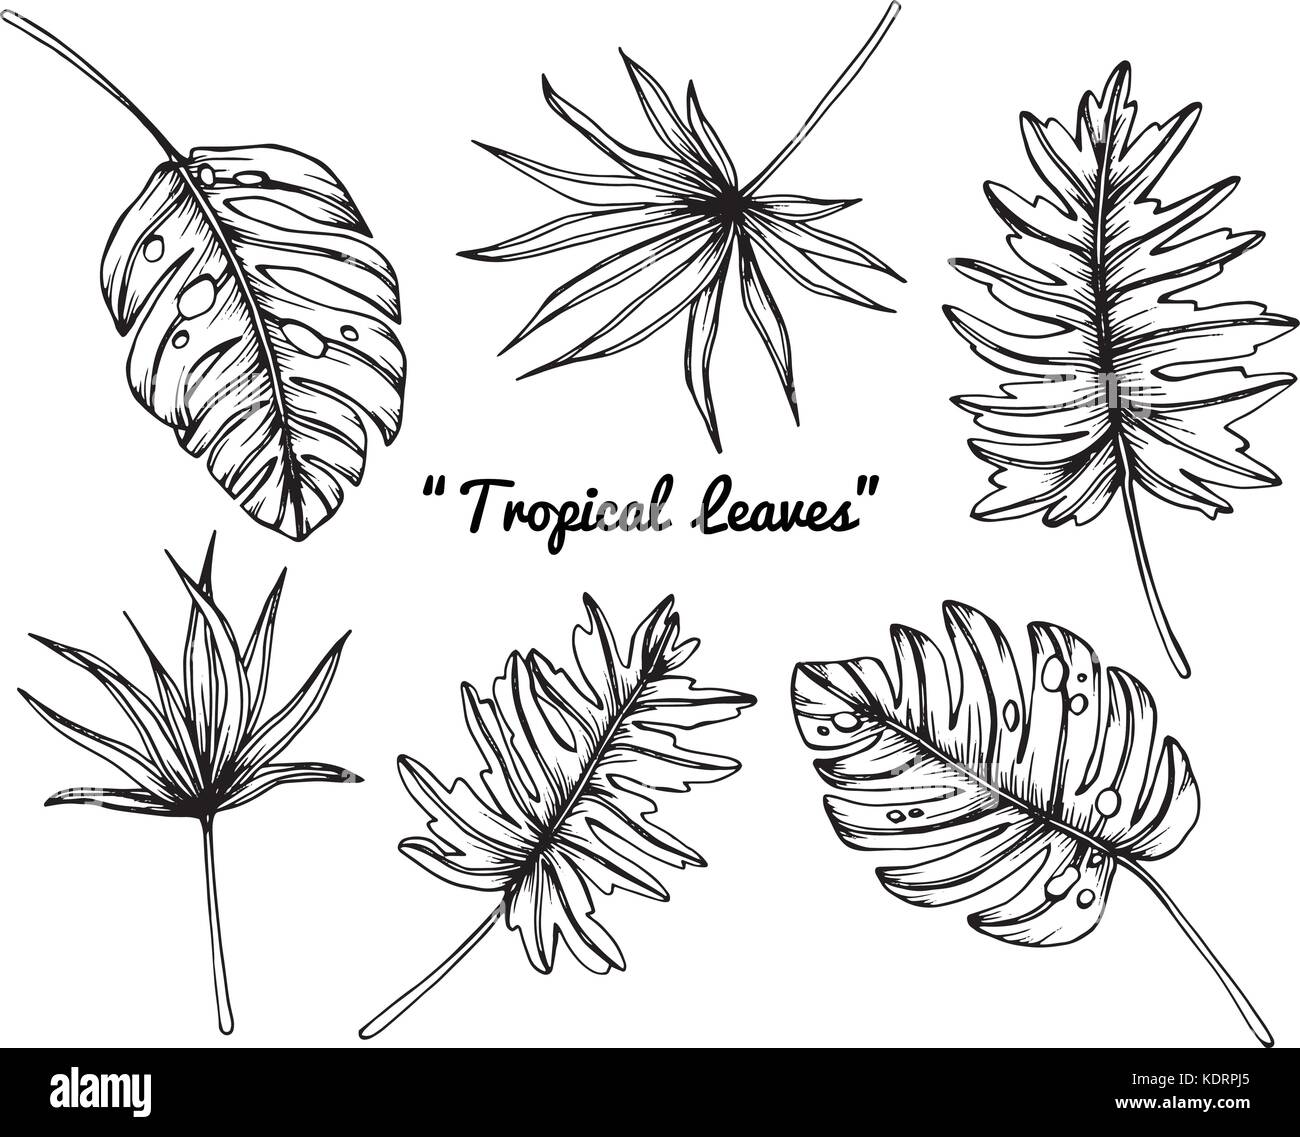 Tropical leaves drawing. Stock Vector